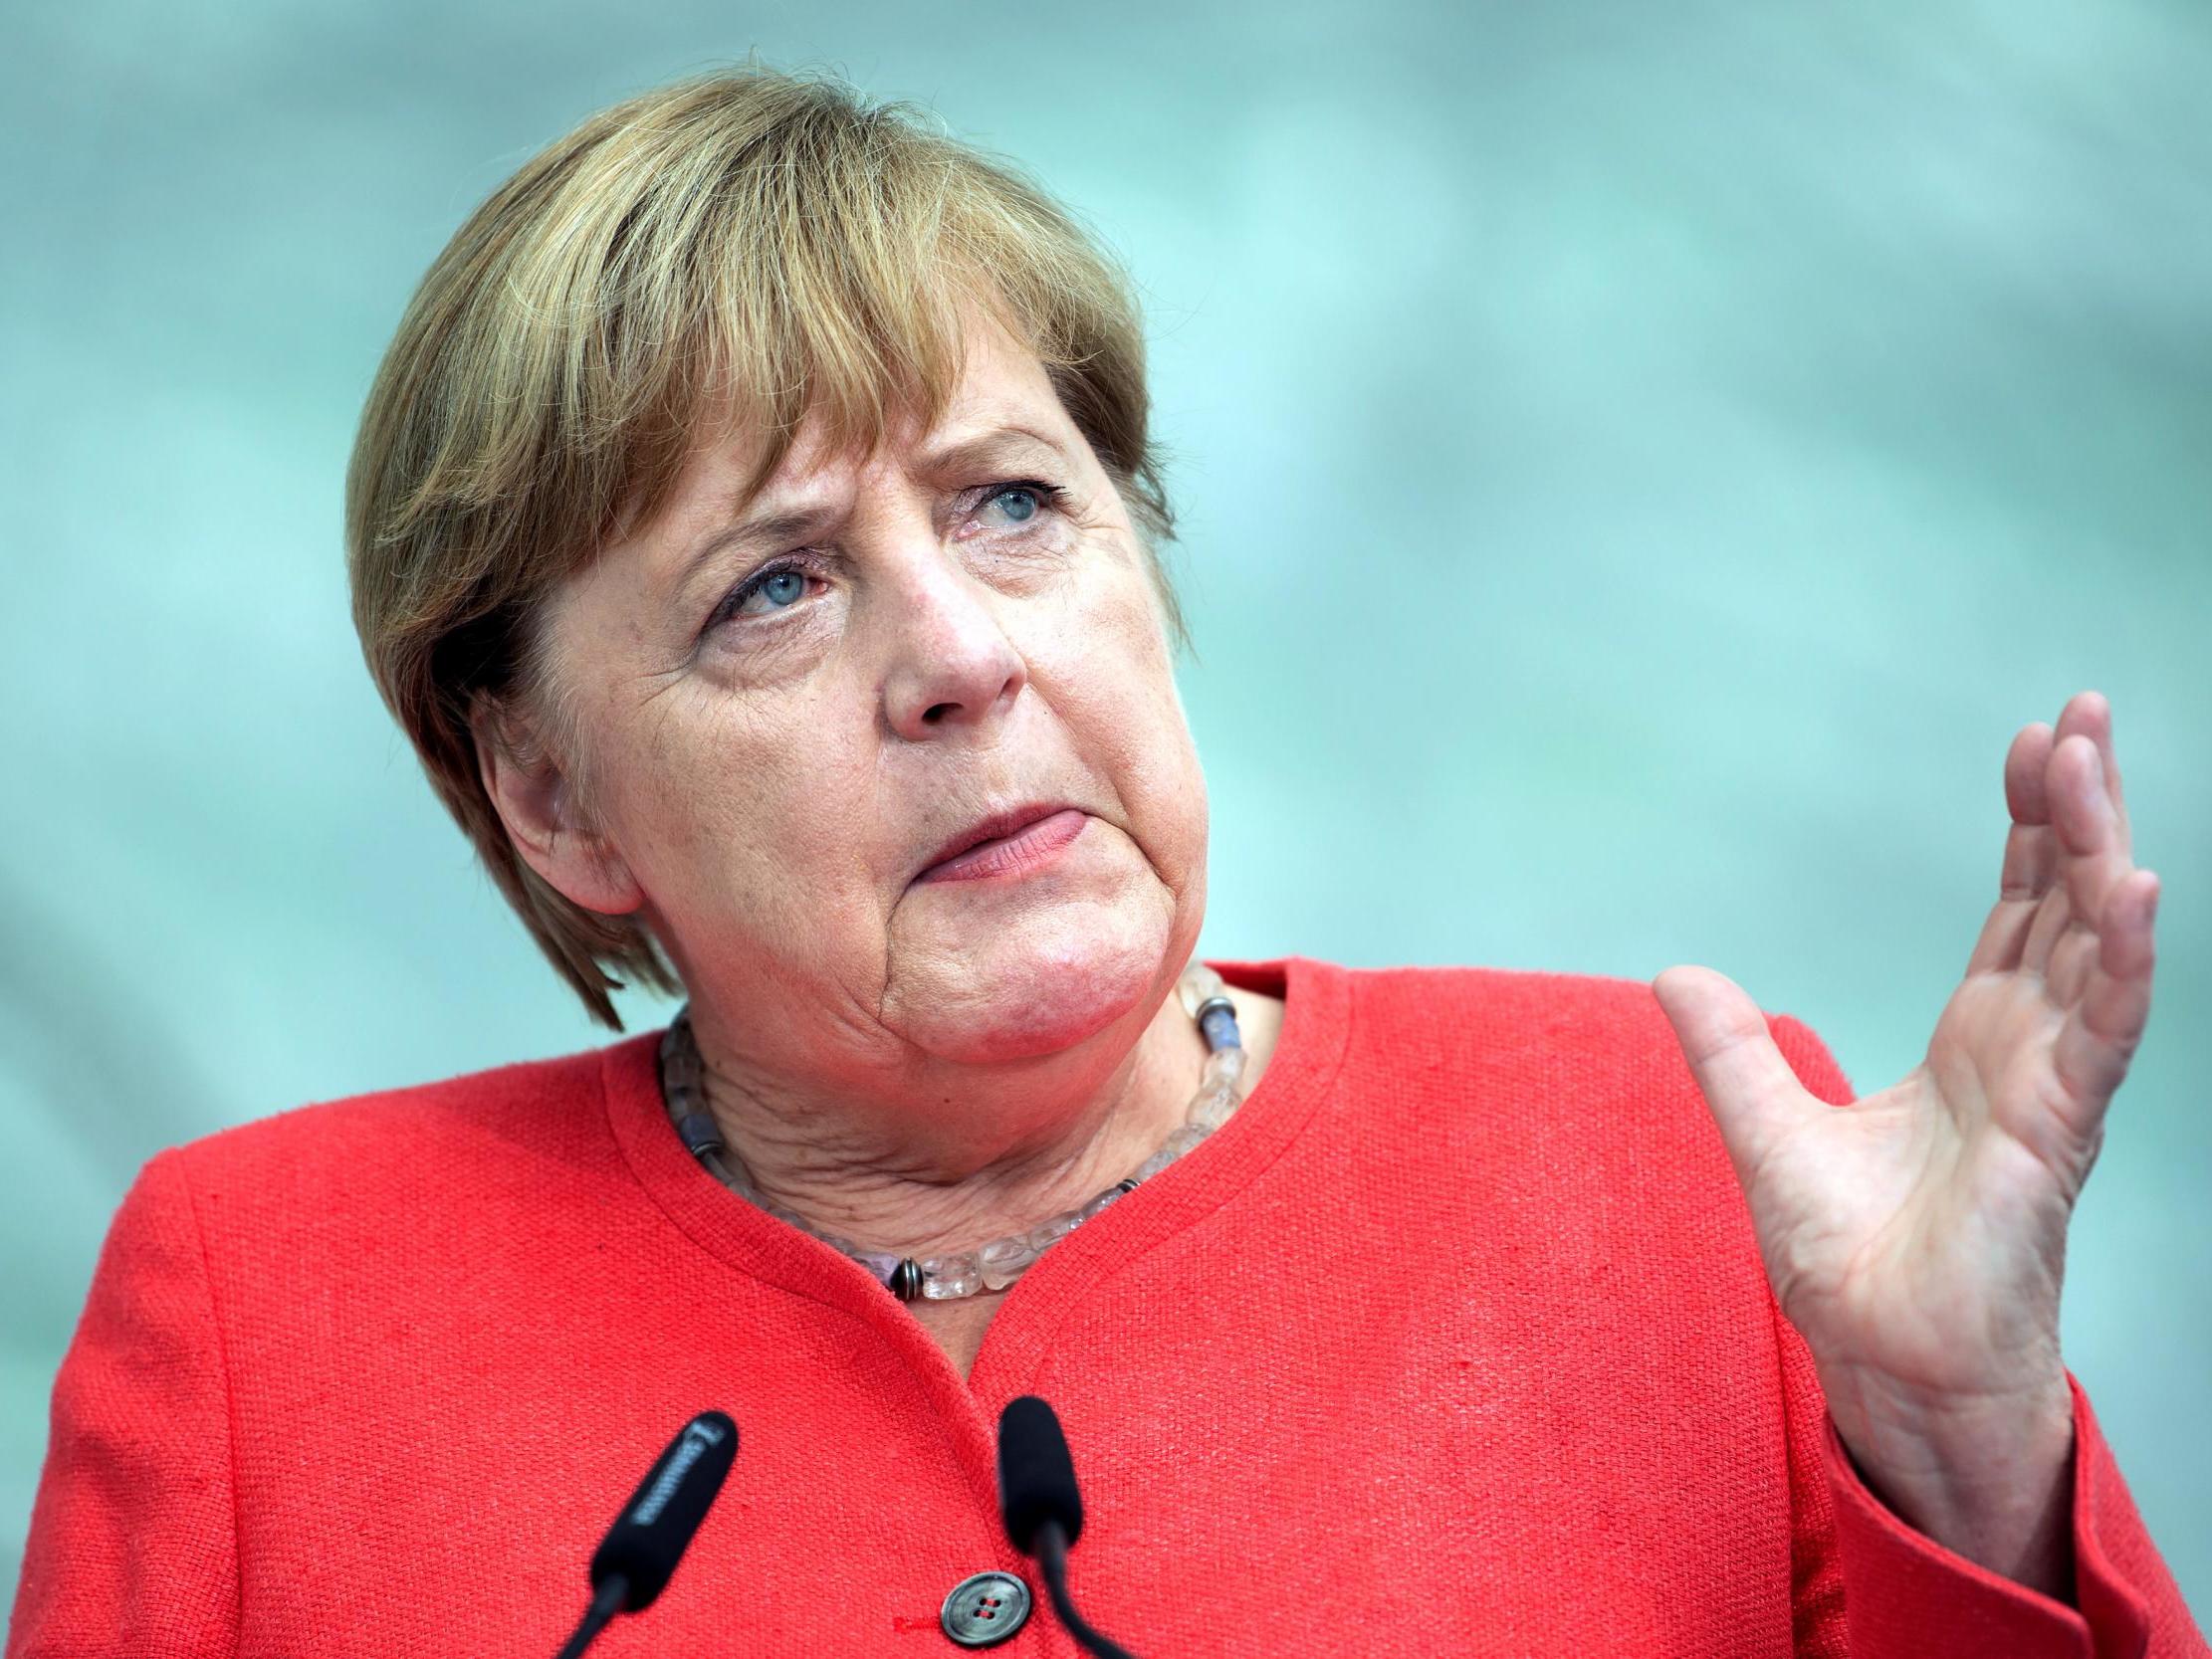 Merkel told journalists in North Rhine-Westphalia that now was not the time to continue easing restrictions